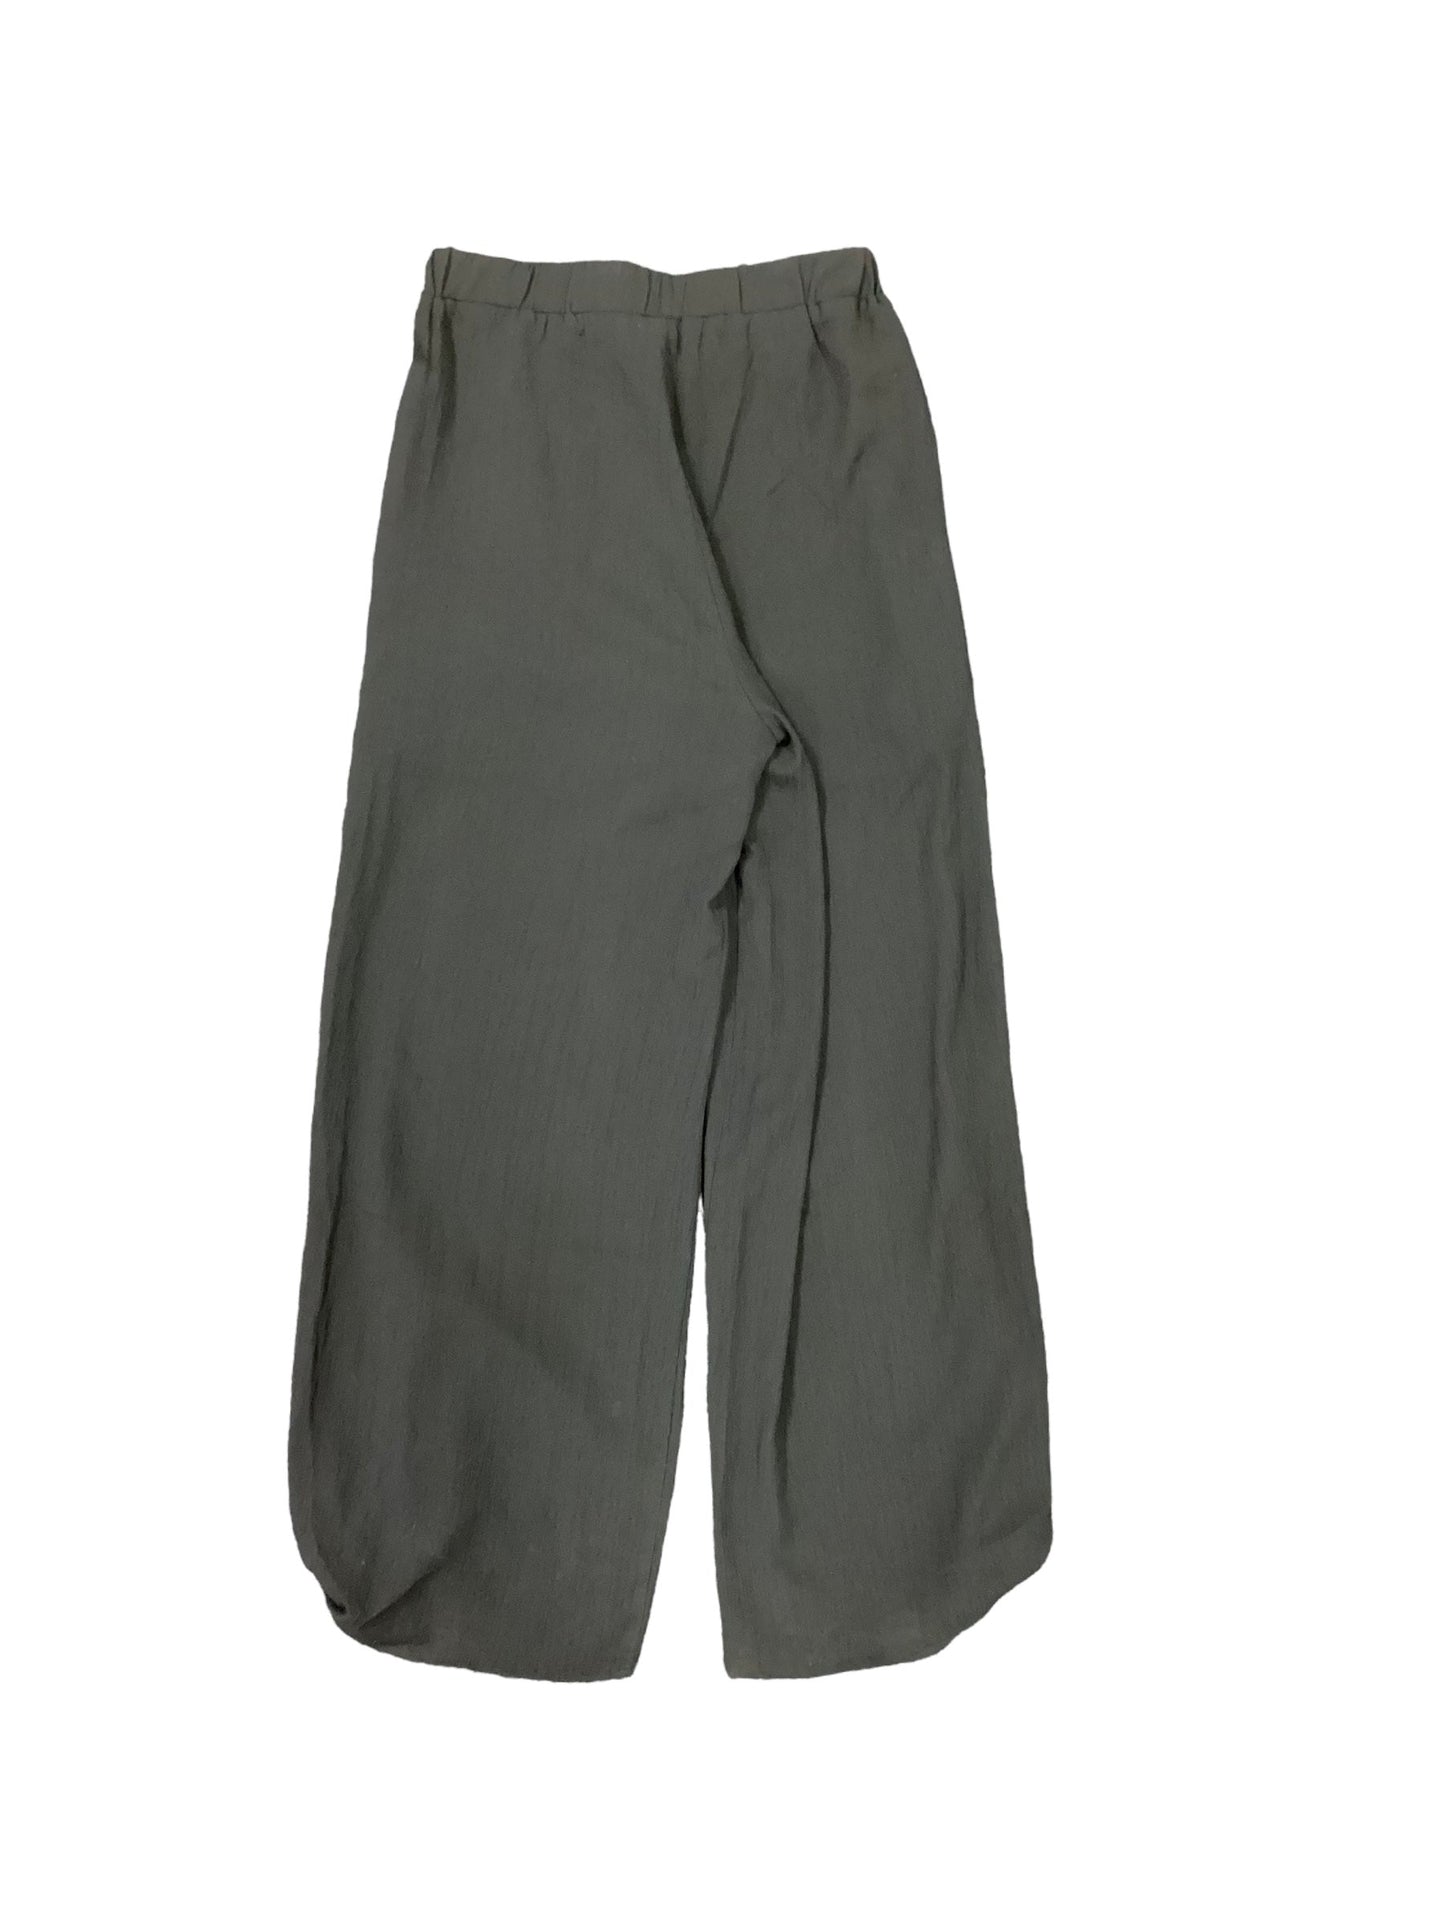 Pants Other By Doe & Rae  Size: S